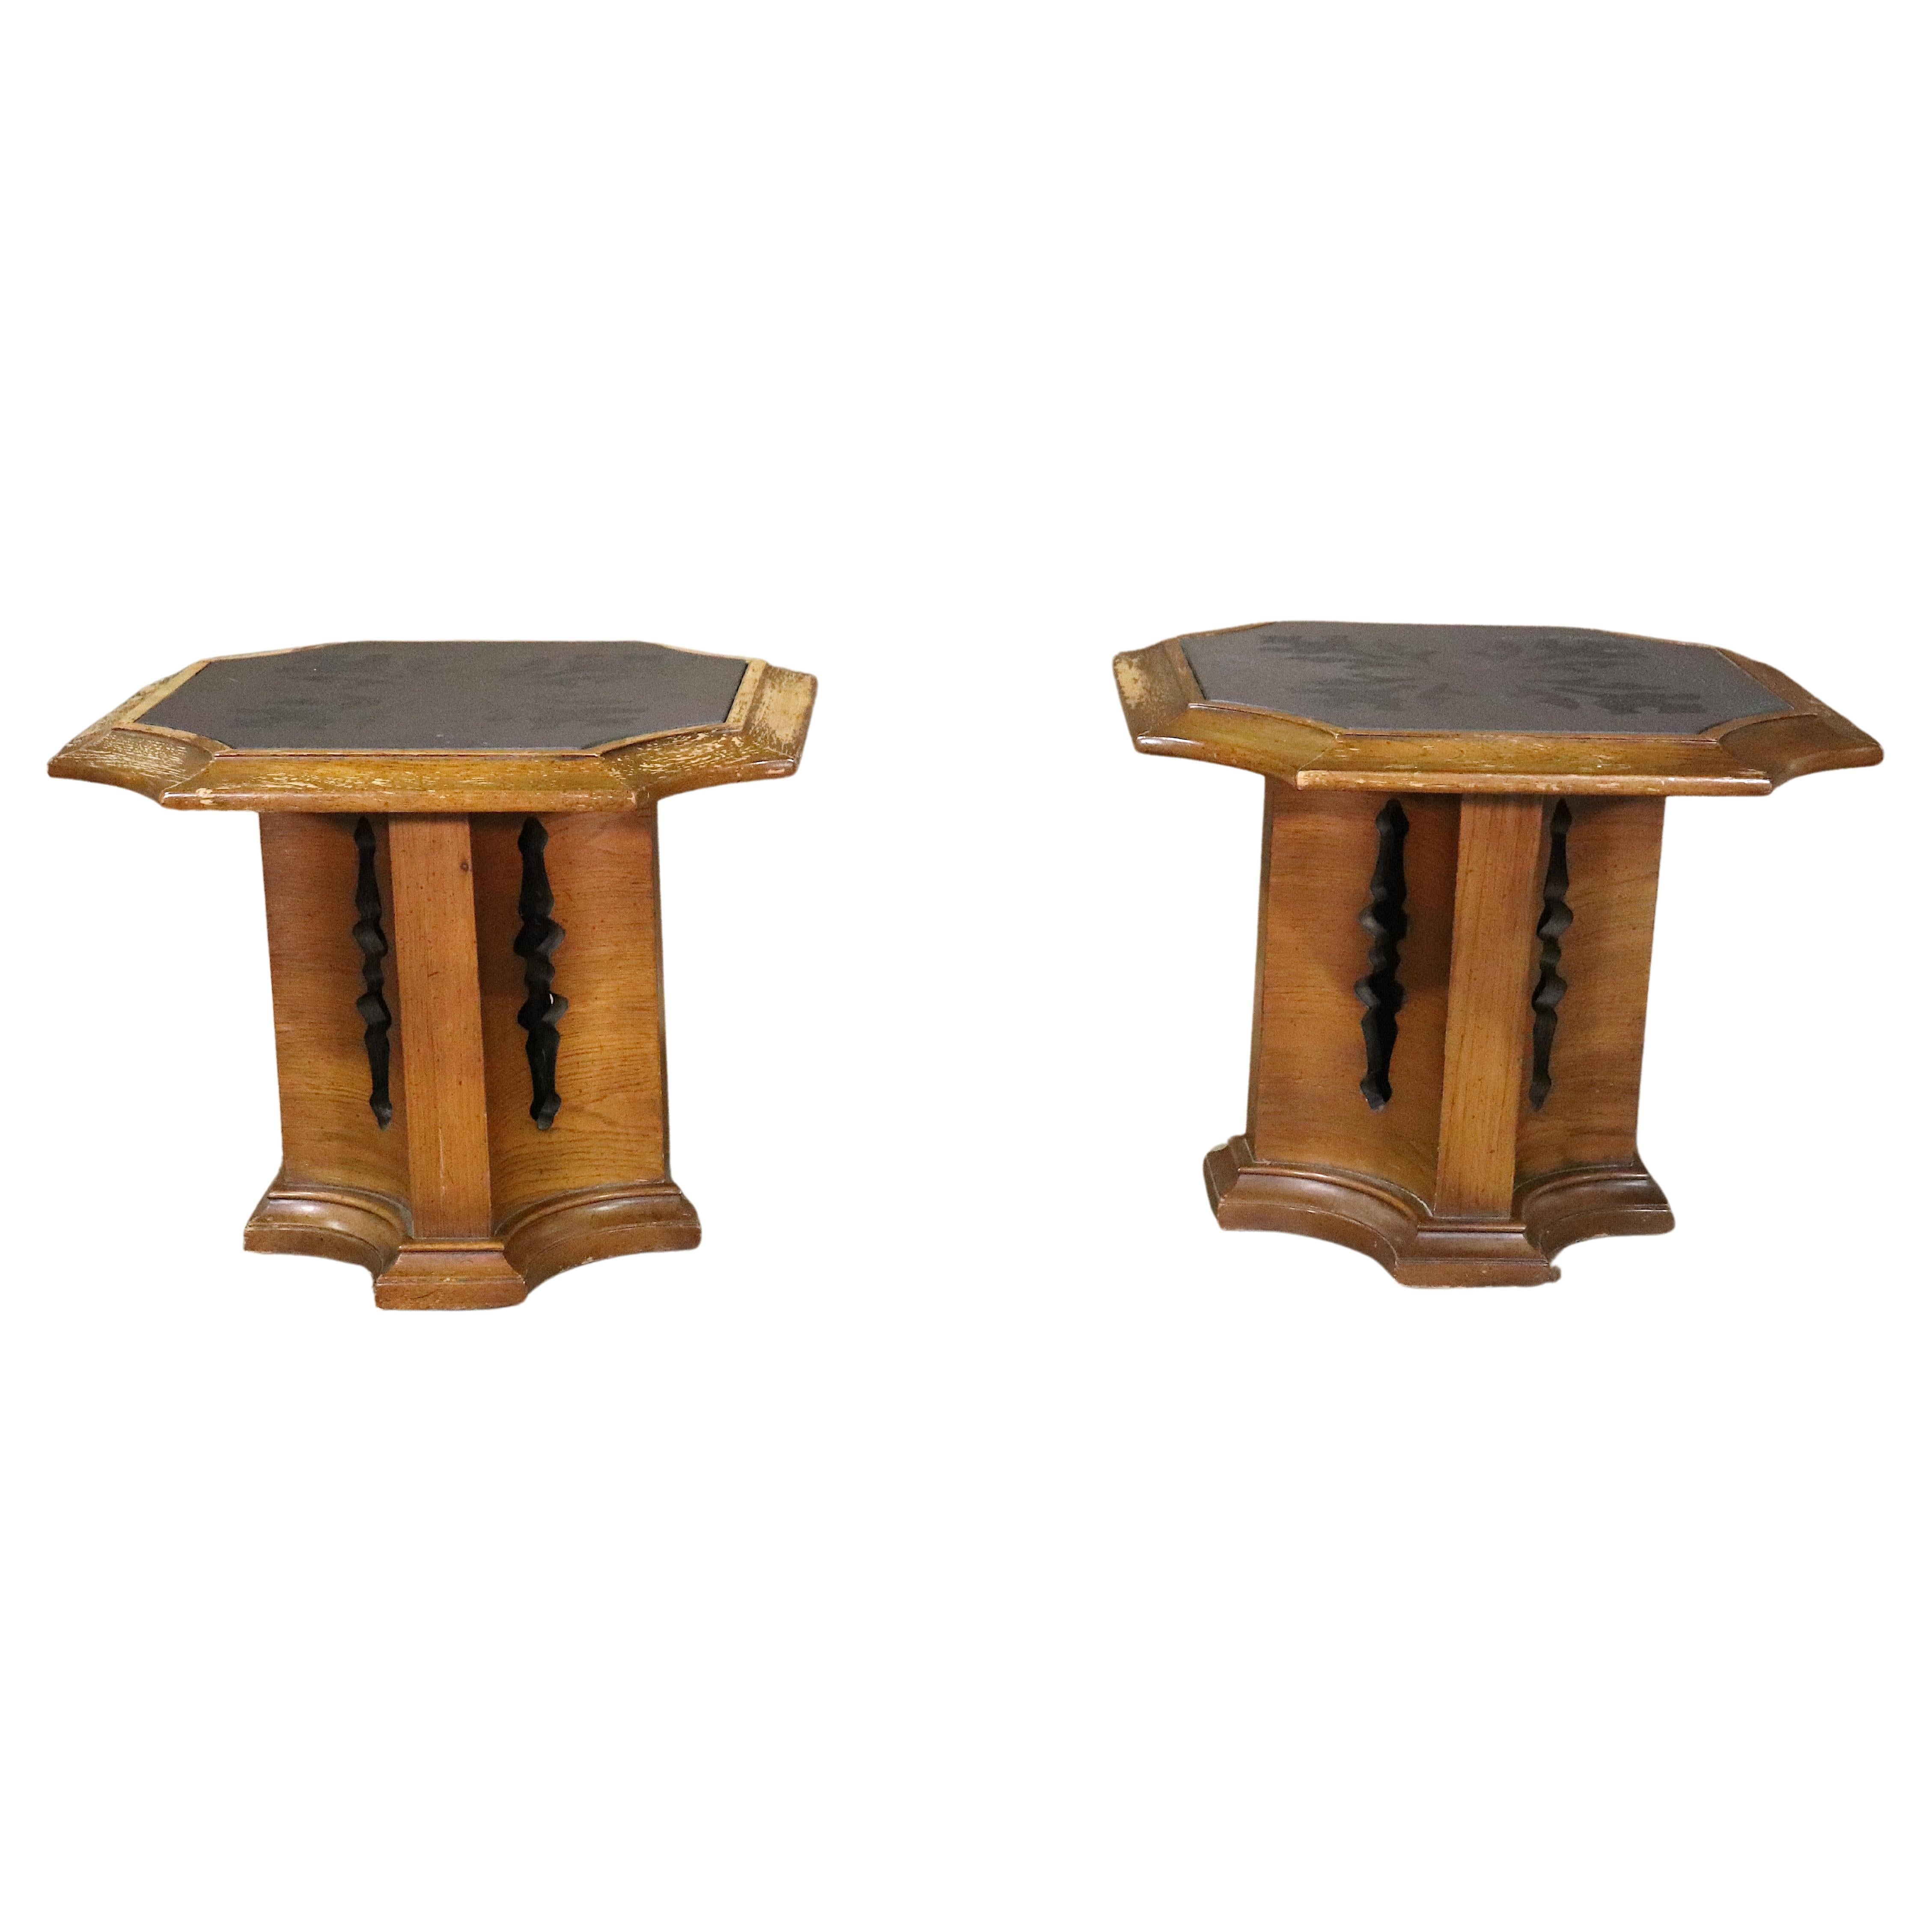 Pair of vintage side tables in walnut wood with black slate tops. Tops are etched and bases are sculpted out.
Please confirm location NY or NJ